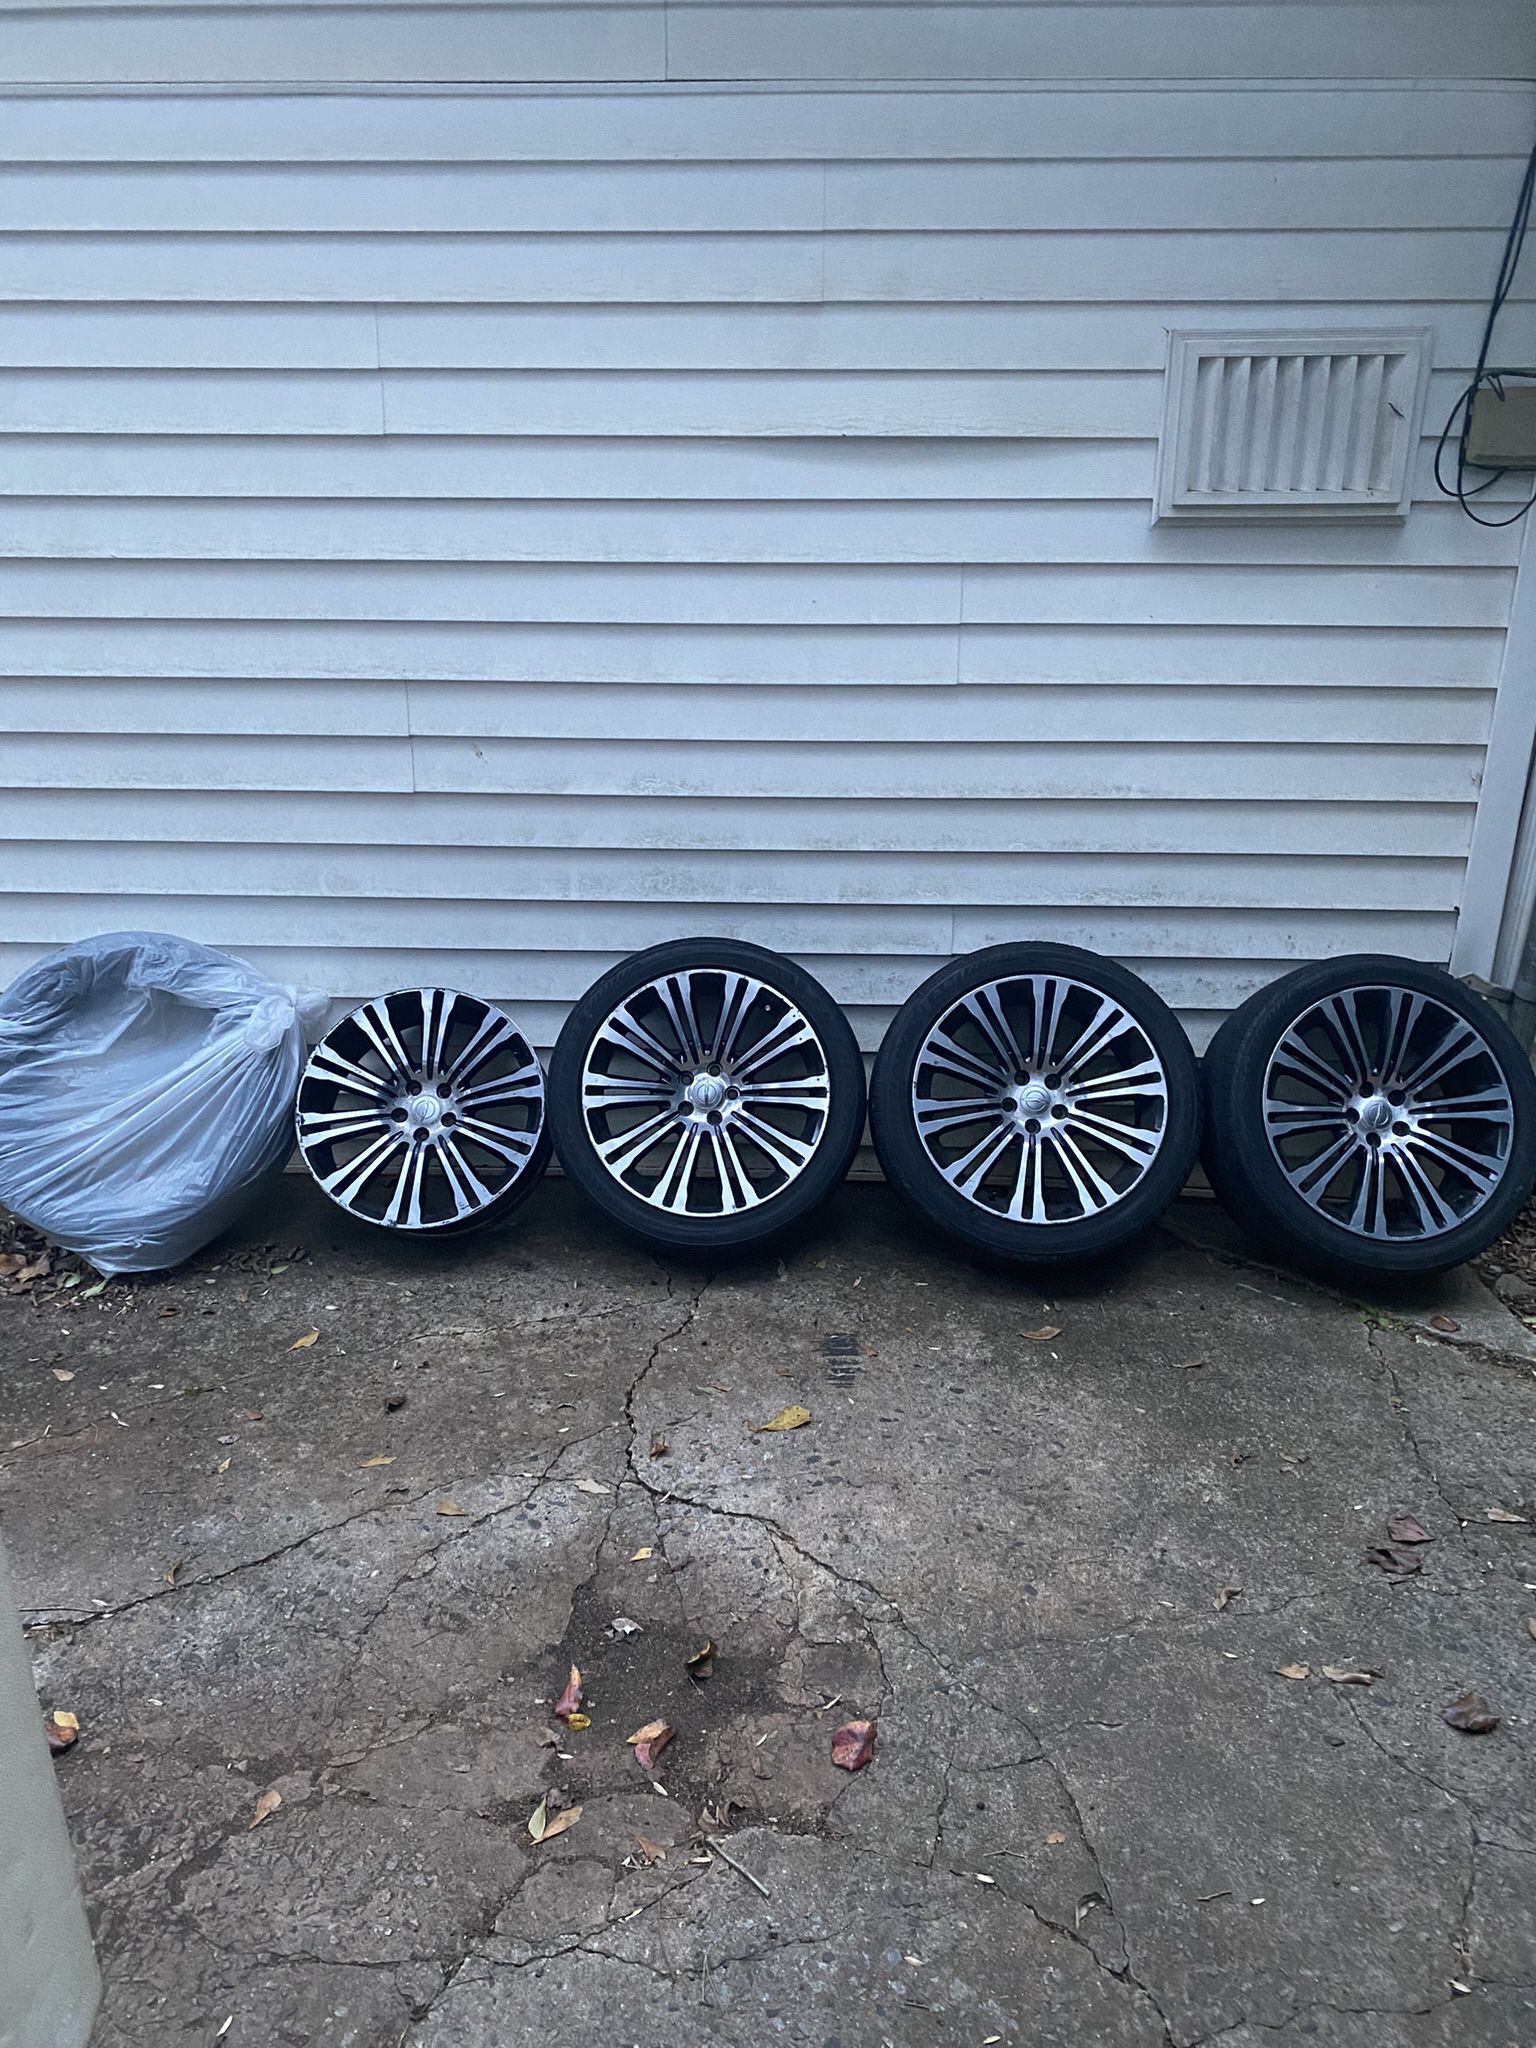 20s Tire And Rims